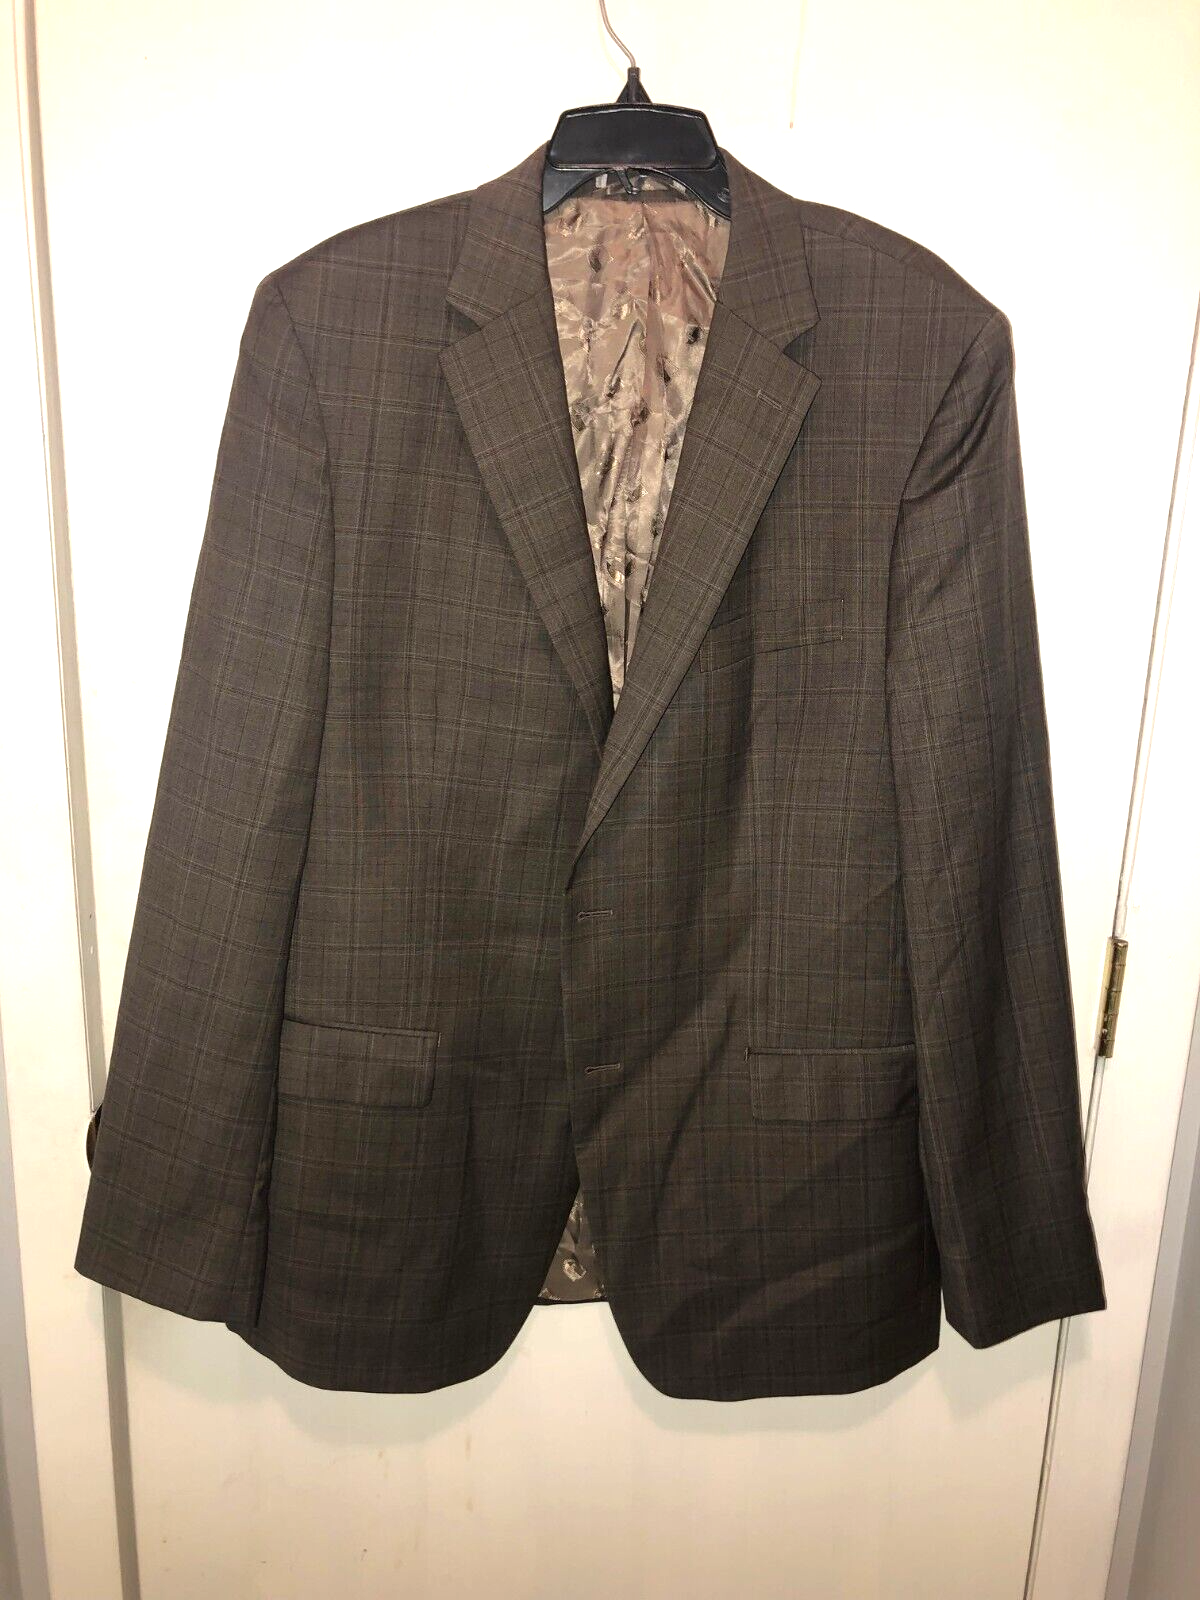 Primary image for Black Brown 1826 For Lord &Taylor Mens 44L Wool Plaid Suit Jacket